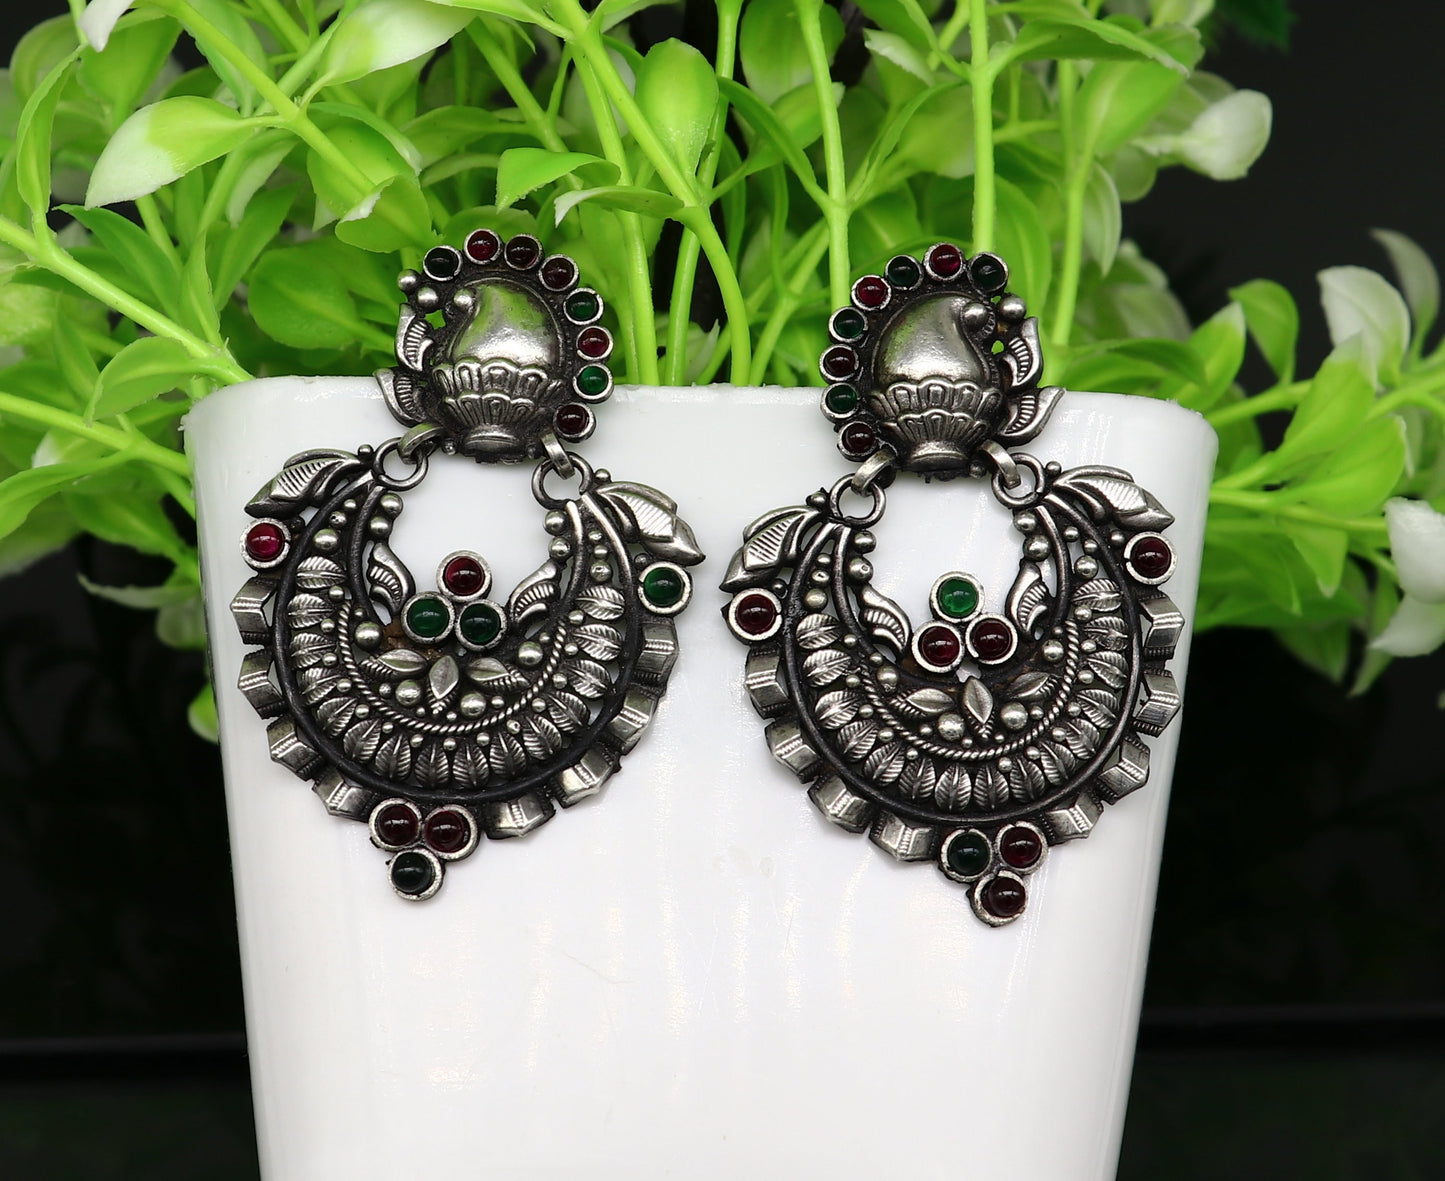 925 sterling silver handmade traditional stylish wedding brides drop dangle stud earring best gifting customized stone work jewelry s950 - TRIBAL ORNAMENTS